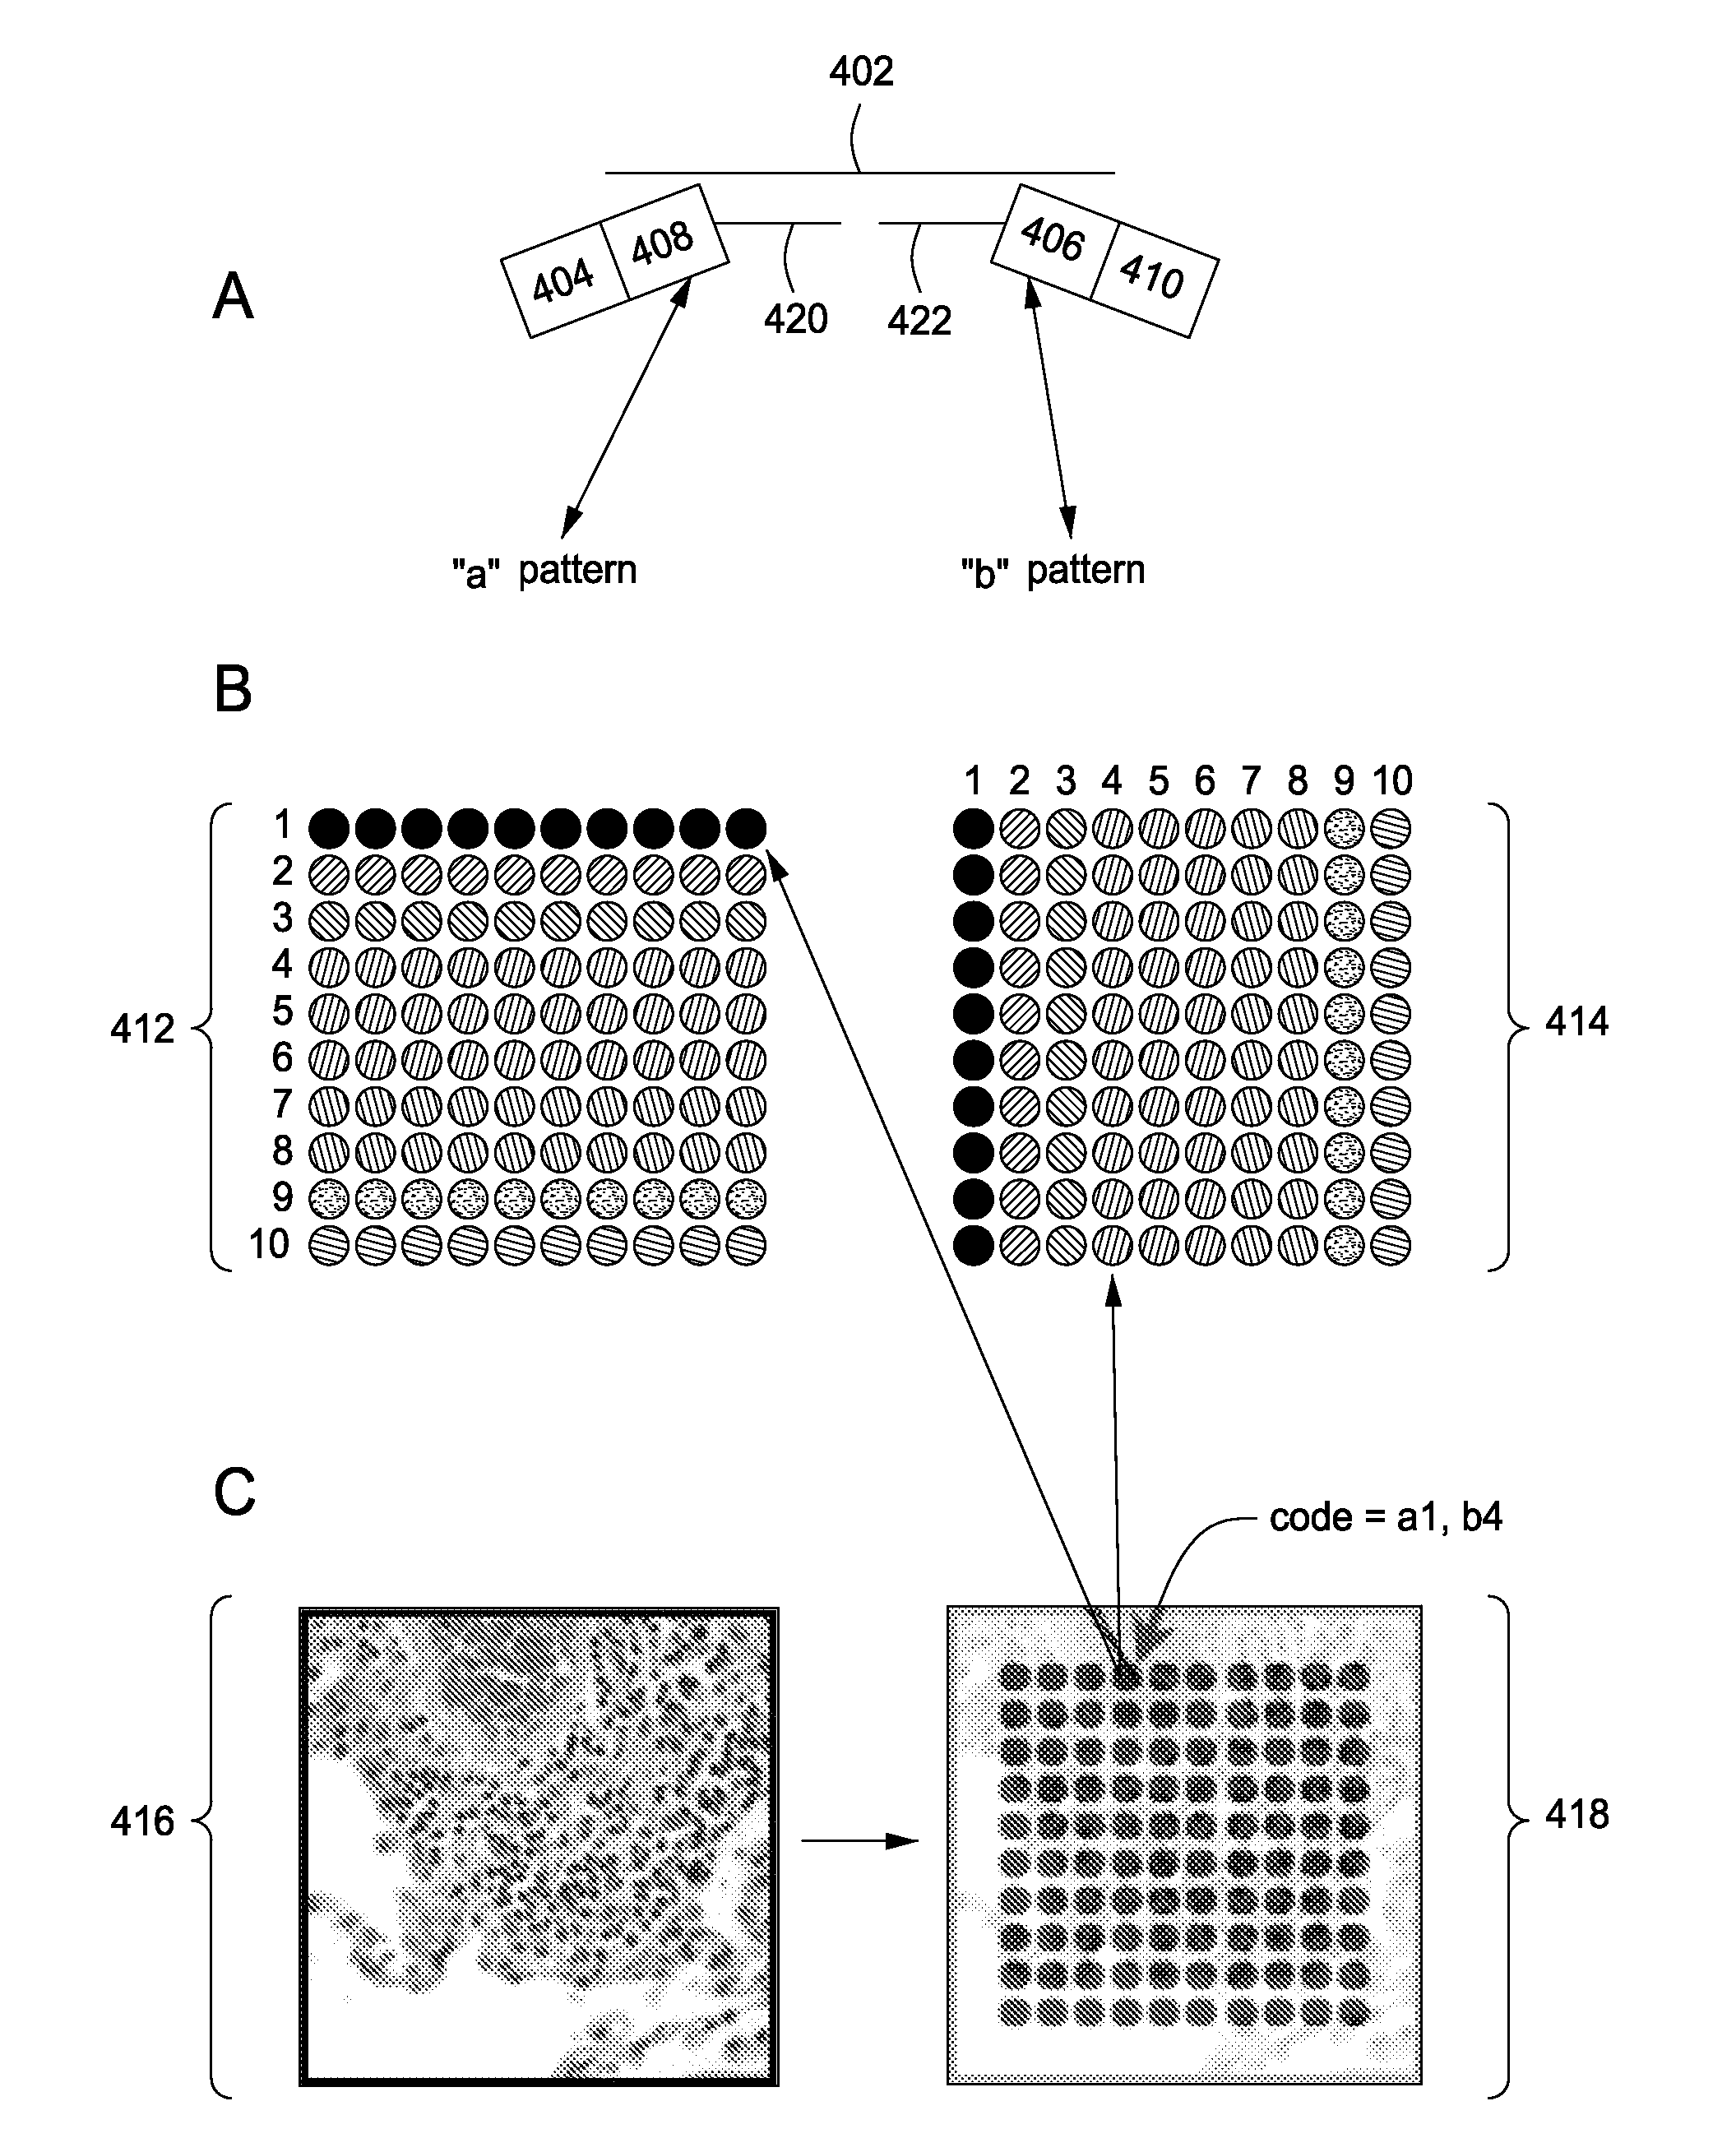 Spatially encoded biological assays